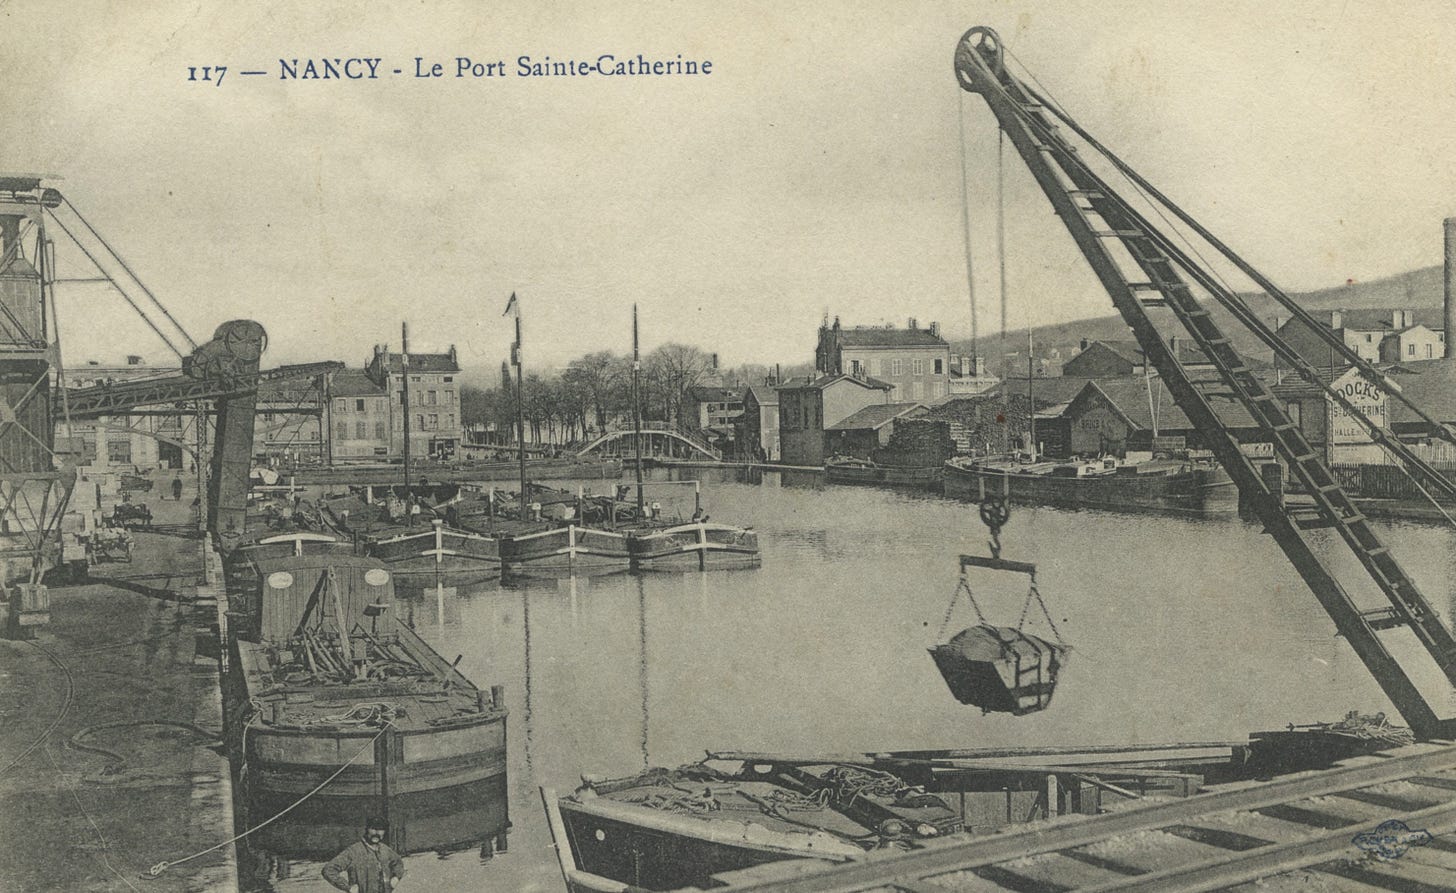 Barges being loaded up in the port of Sainte-Catherine in Nancy, ca. 1904, where much of Fleury's business took place. © Images-Est, FI-0859-1068. https://www.image-est.fr/Fiche-documentaire-Port-Sainte-Catherine-_Nancy_-1284-11512-2-4.html